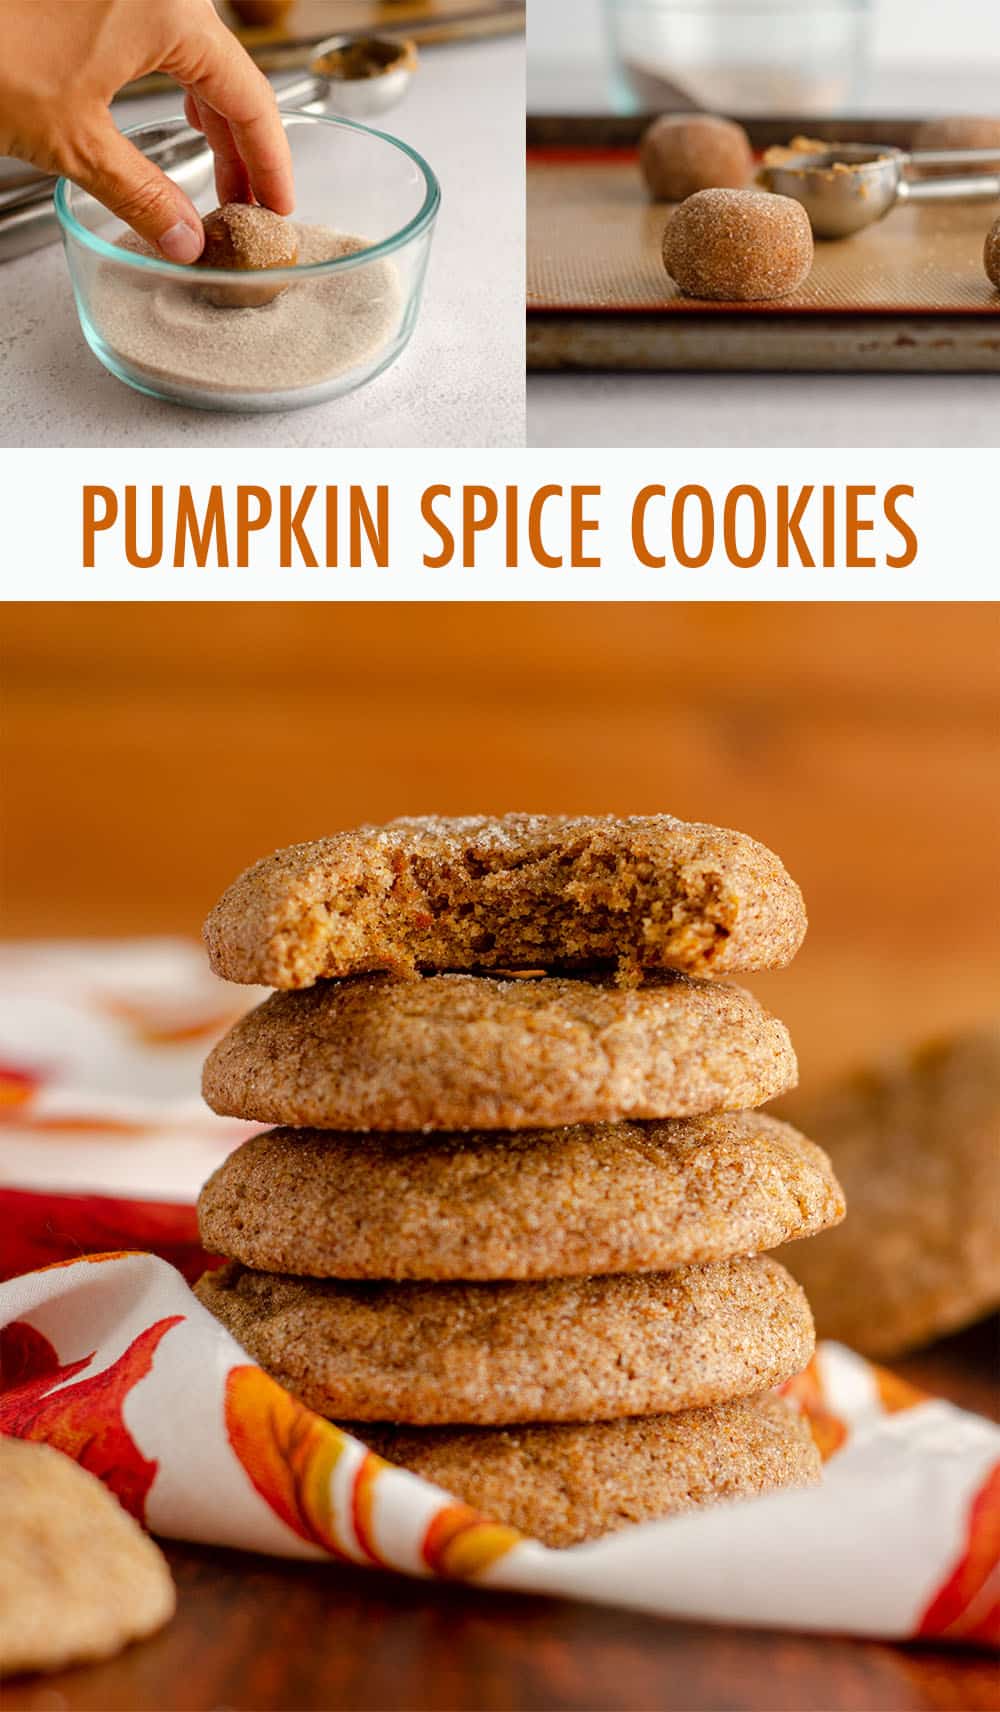 These eggless chewy pumpkin spice cookies are like a pumpkin snickerdoodle, coated in a spiced cinnamon sugar with a perfectly soft and chewy interior bursting with pumpkin flavor. via @frshaprilflours